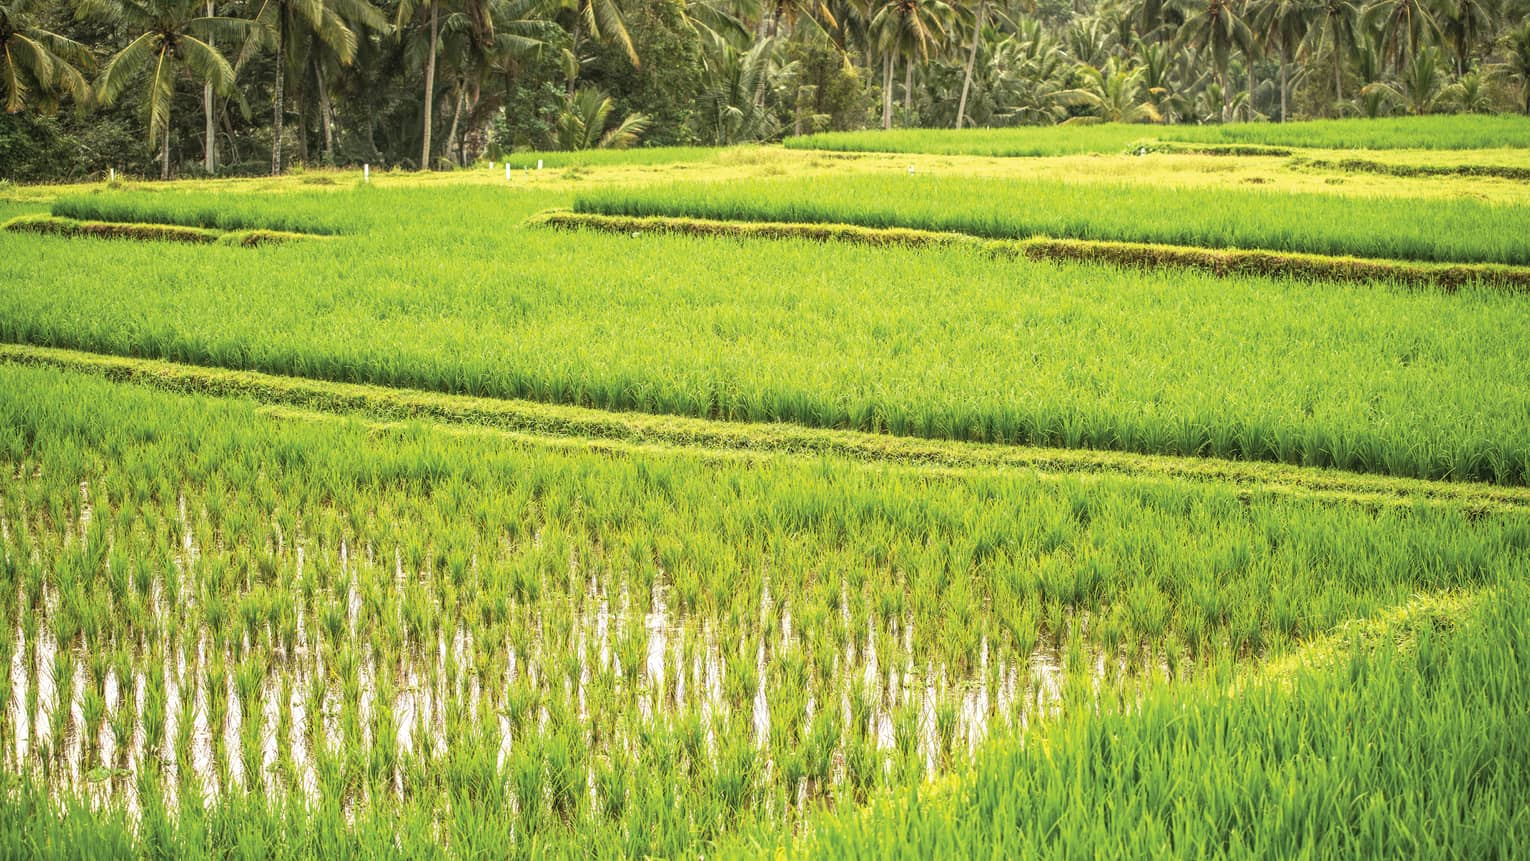 Bright green rice field in Bali, with palm trees at the edge of the field